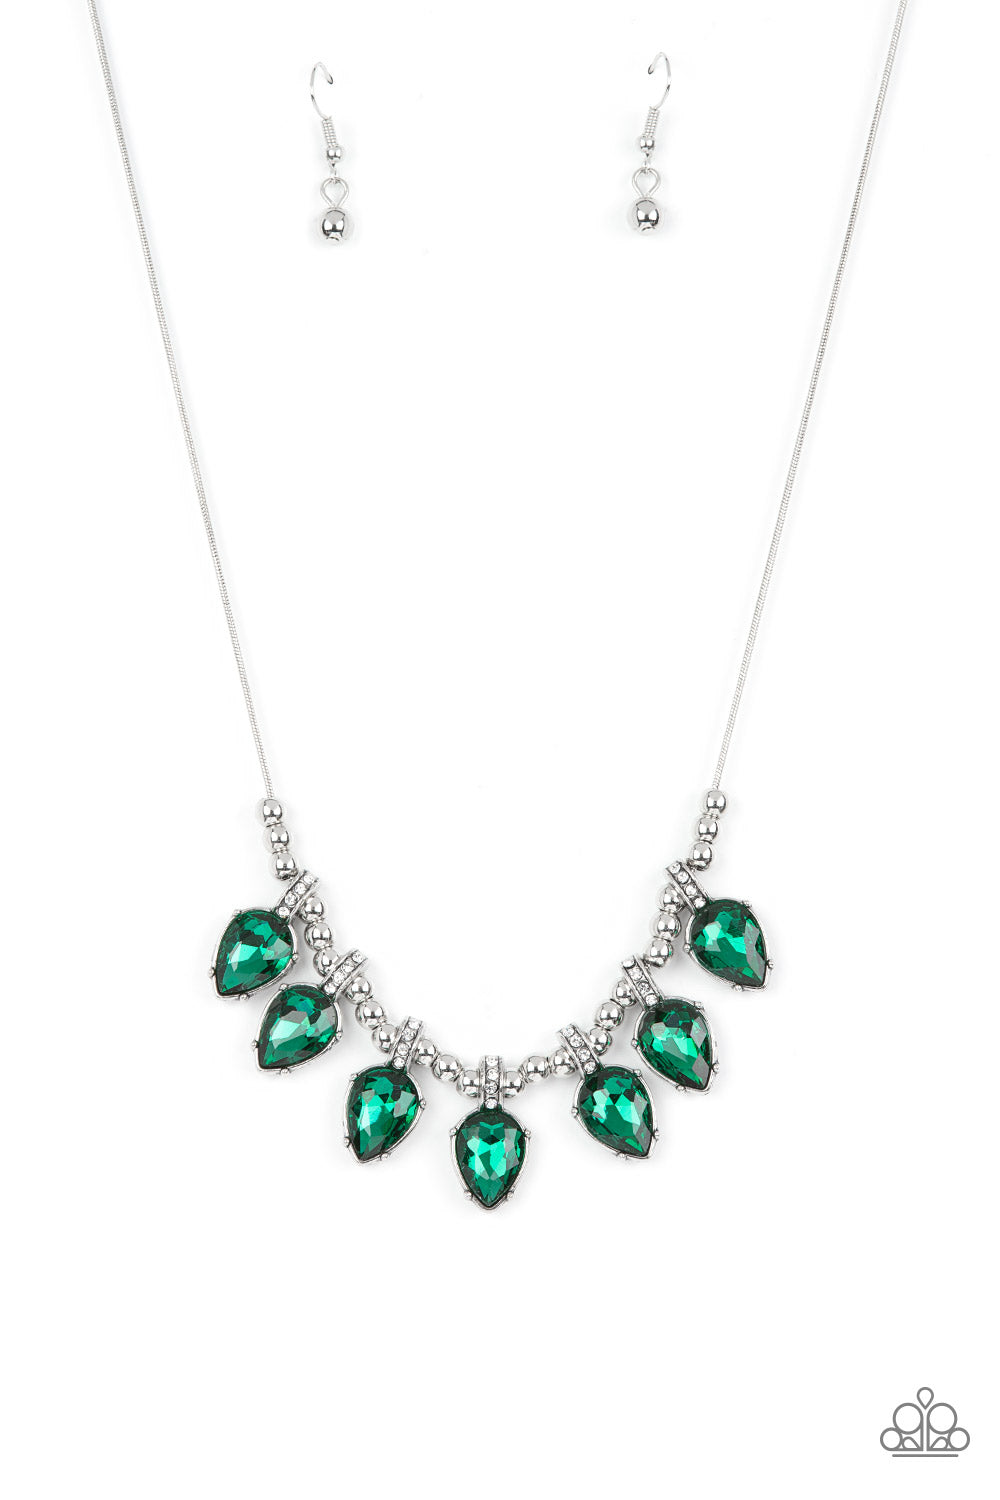 Crown Jewel Couture - Green Necklace - Paparazzi Accessories - Paparazzi Accessories 